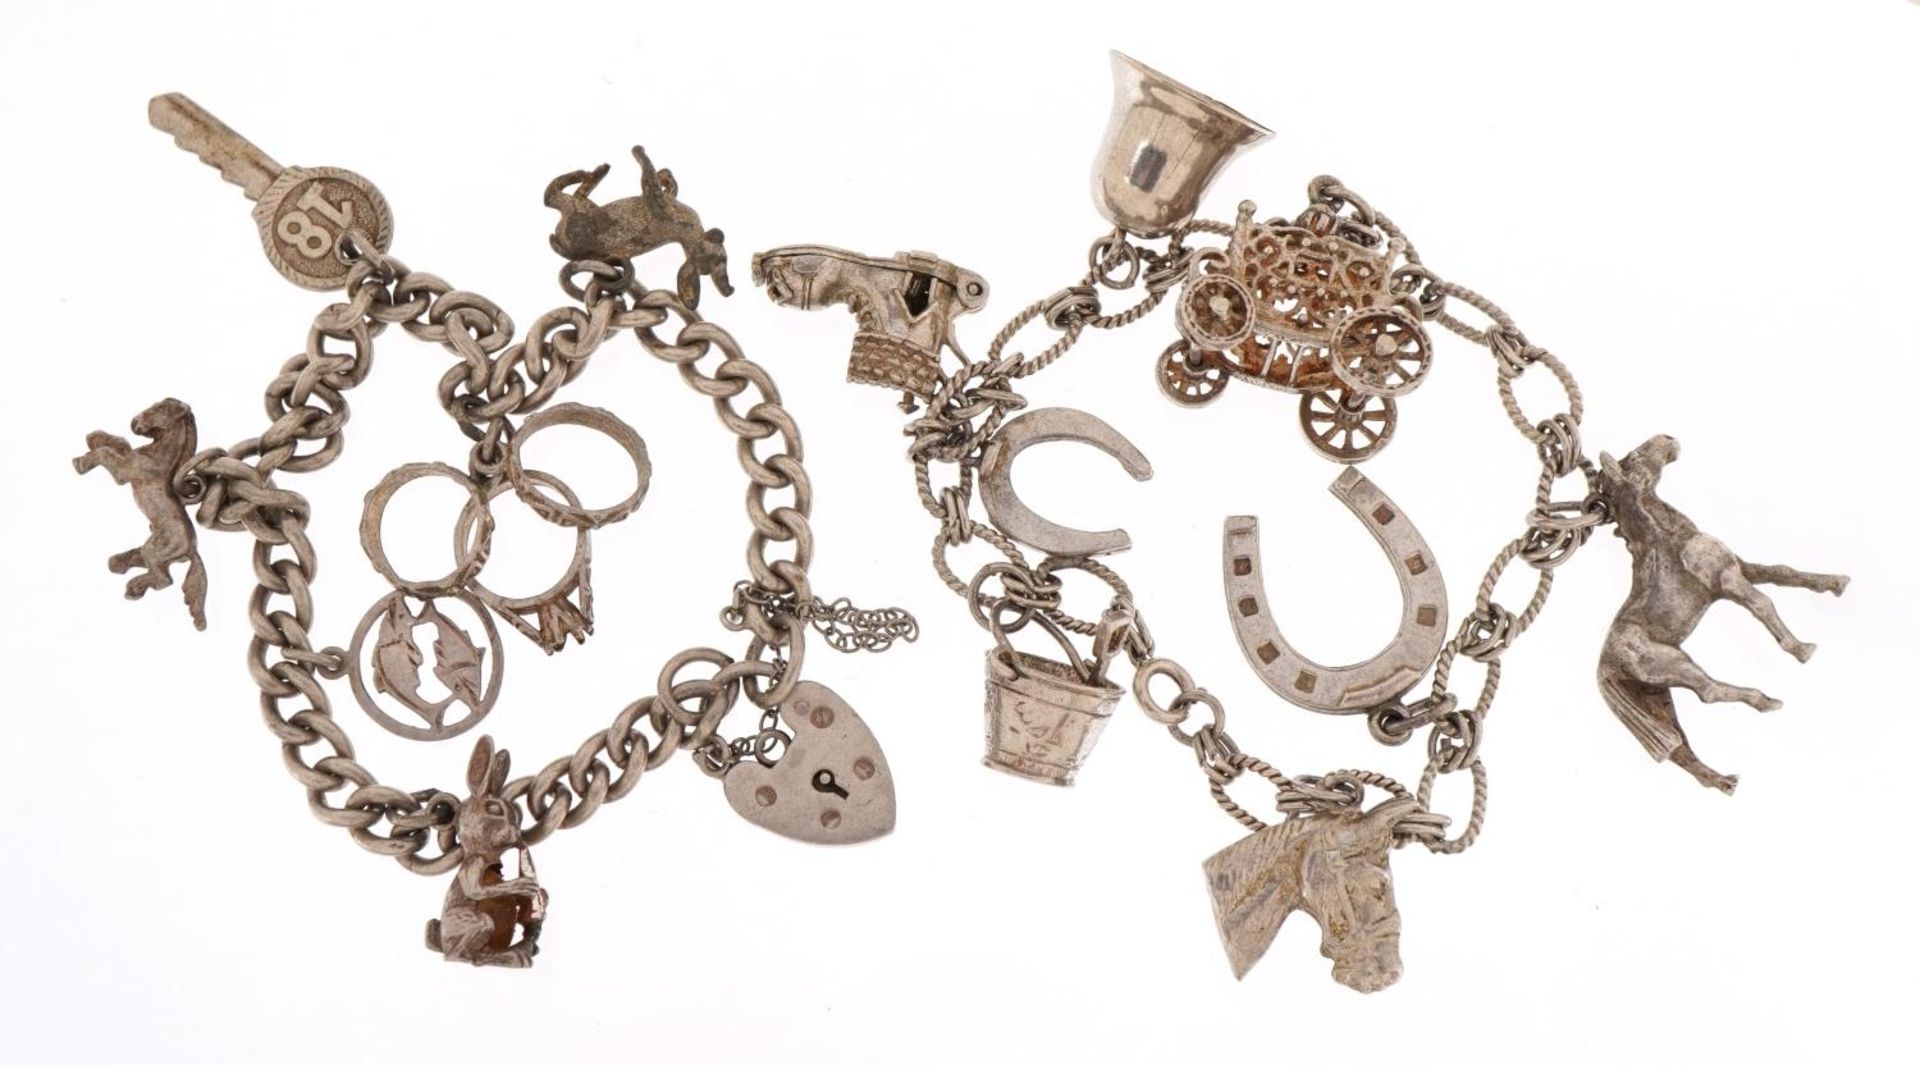 Two silver charm bracelets with a selection of mostly silver charms including horsehead, carriage